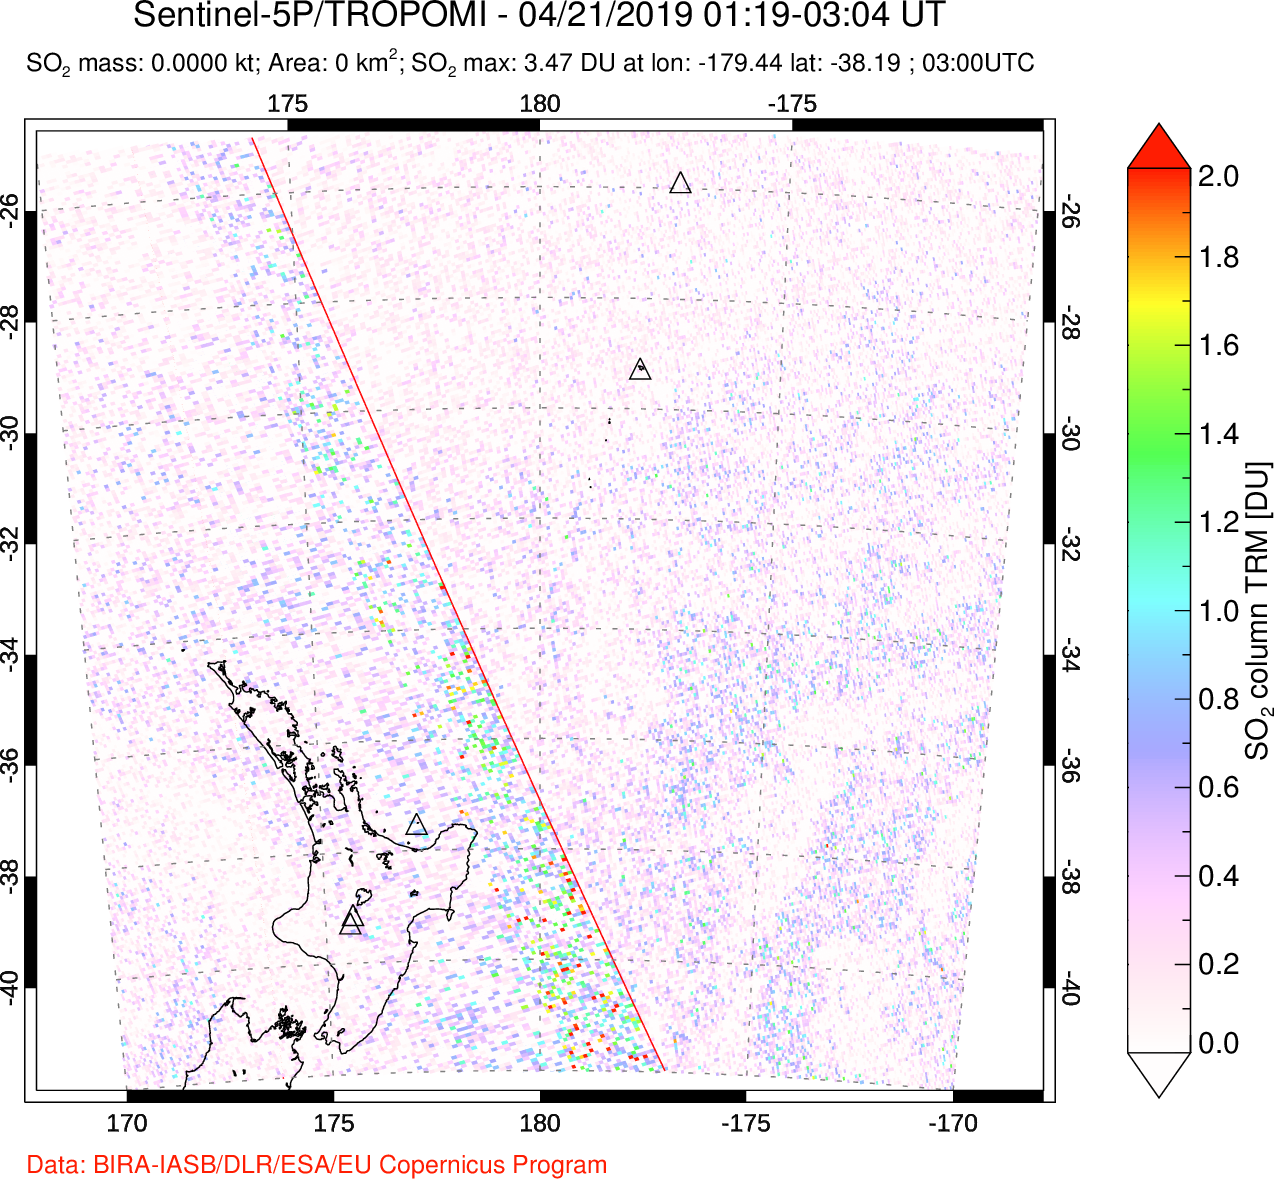 A sulfur dioxide image over New Zealand on Apr 21, 2019.